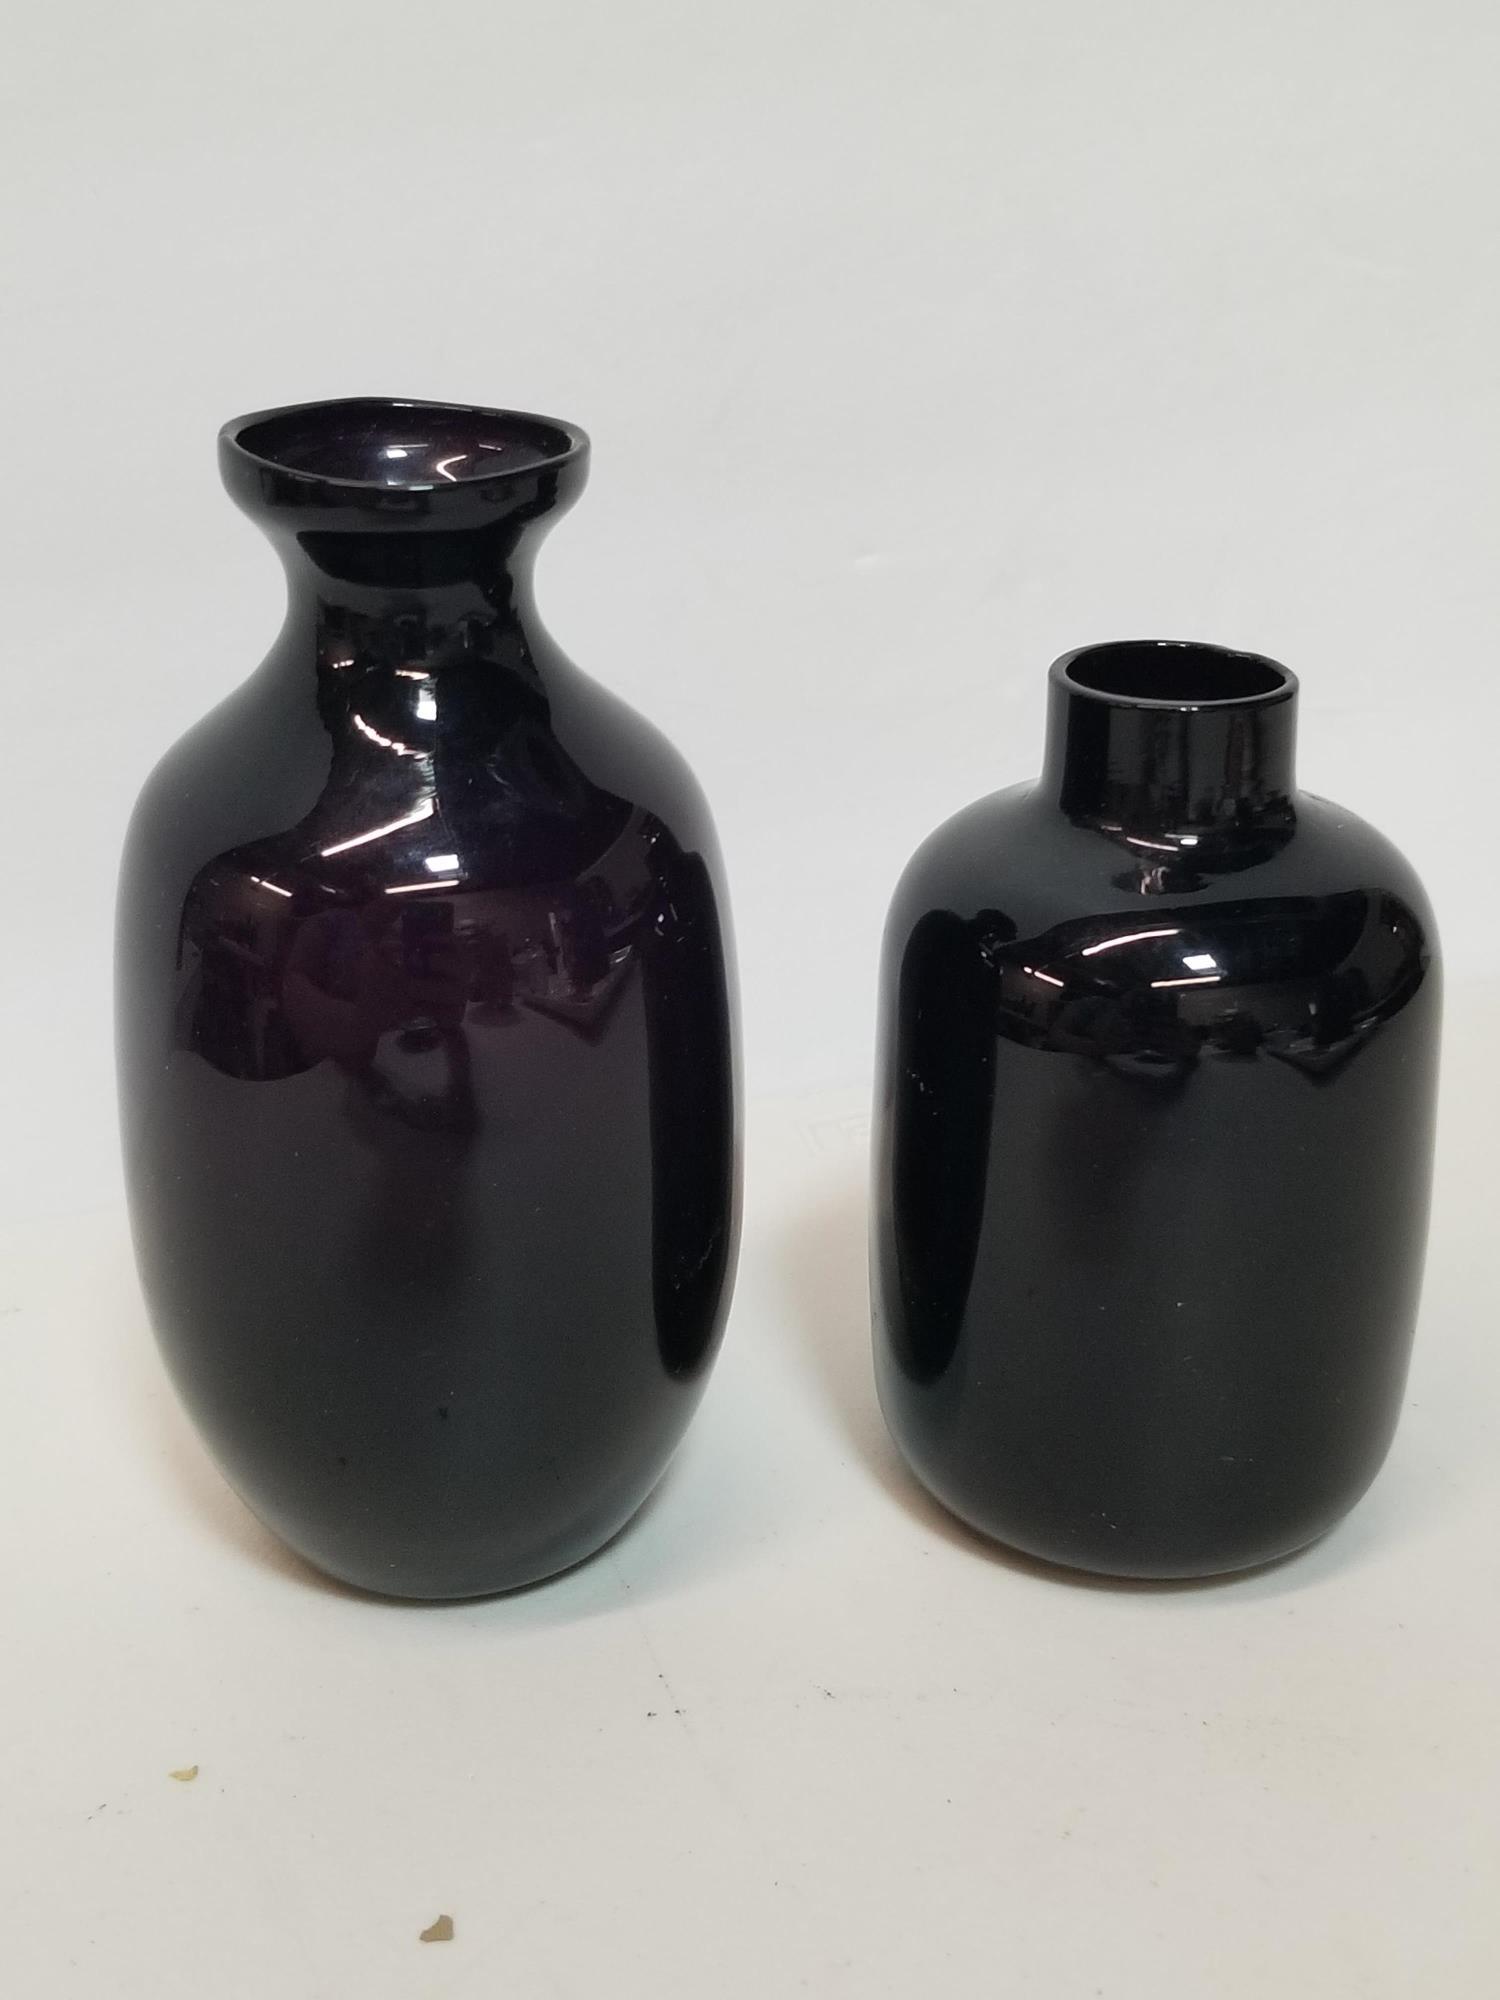 PAIR OF VIOLET HANDBLOWN SMALL GLASS VASES